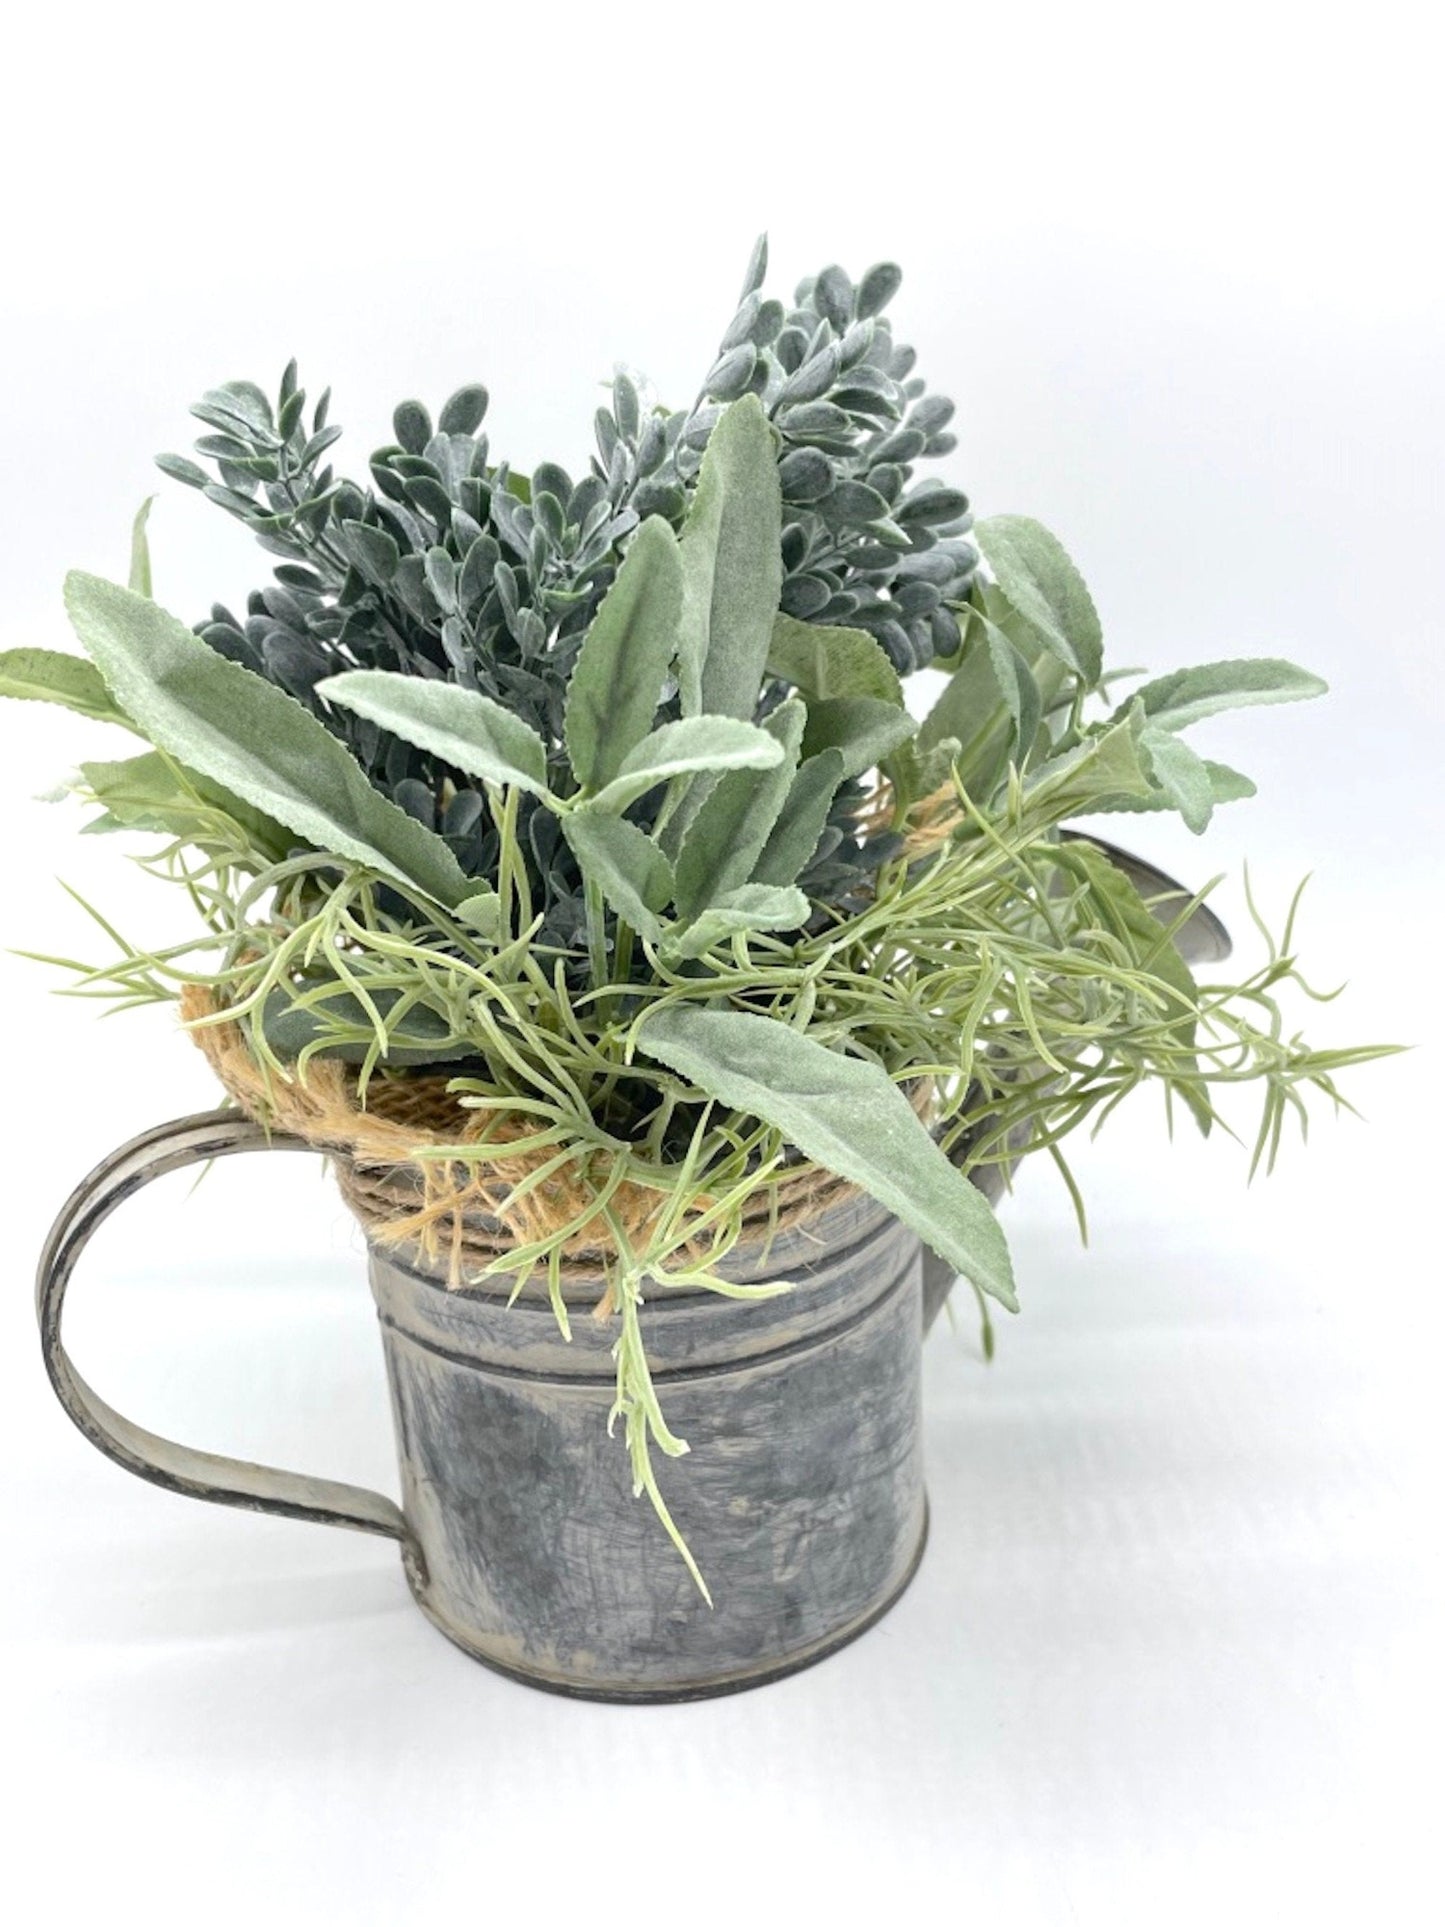 Greenery Arrangement in Metal Watering Can, Herb Decor for Kitchen Island